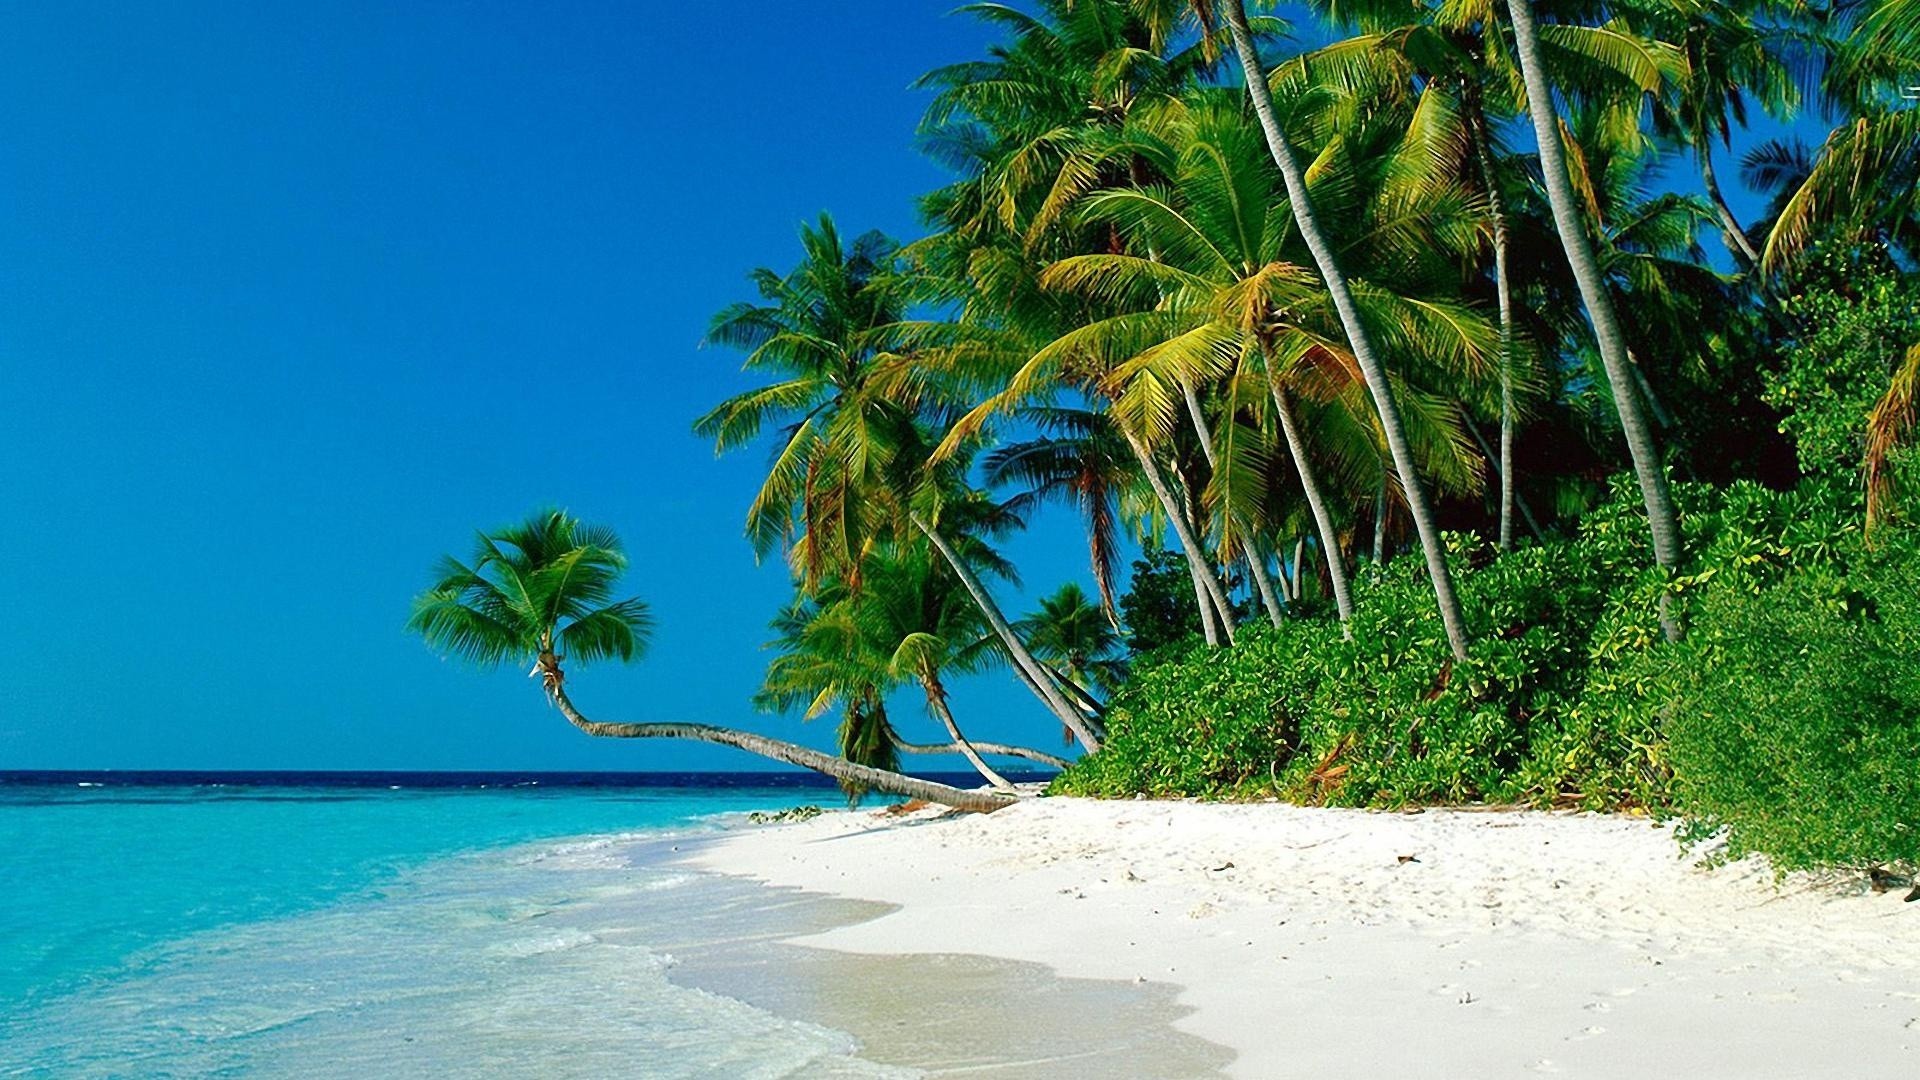 ... Palm Trees Background Hd With Tropical Beaches Tropical With Architecture Ideas And Tropical Beaches With Palm ...